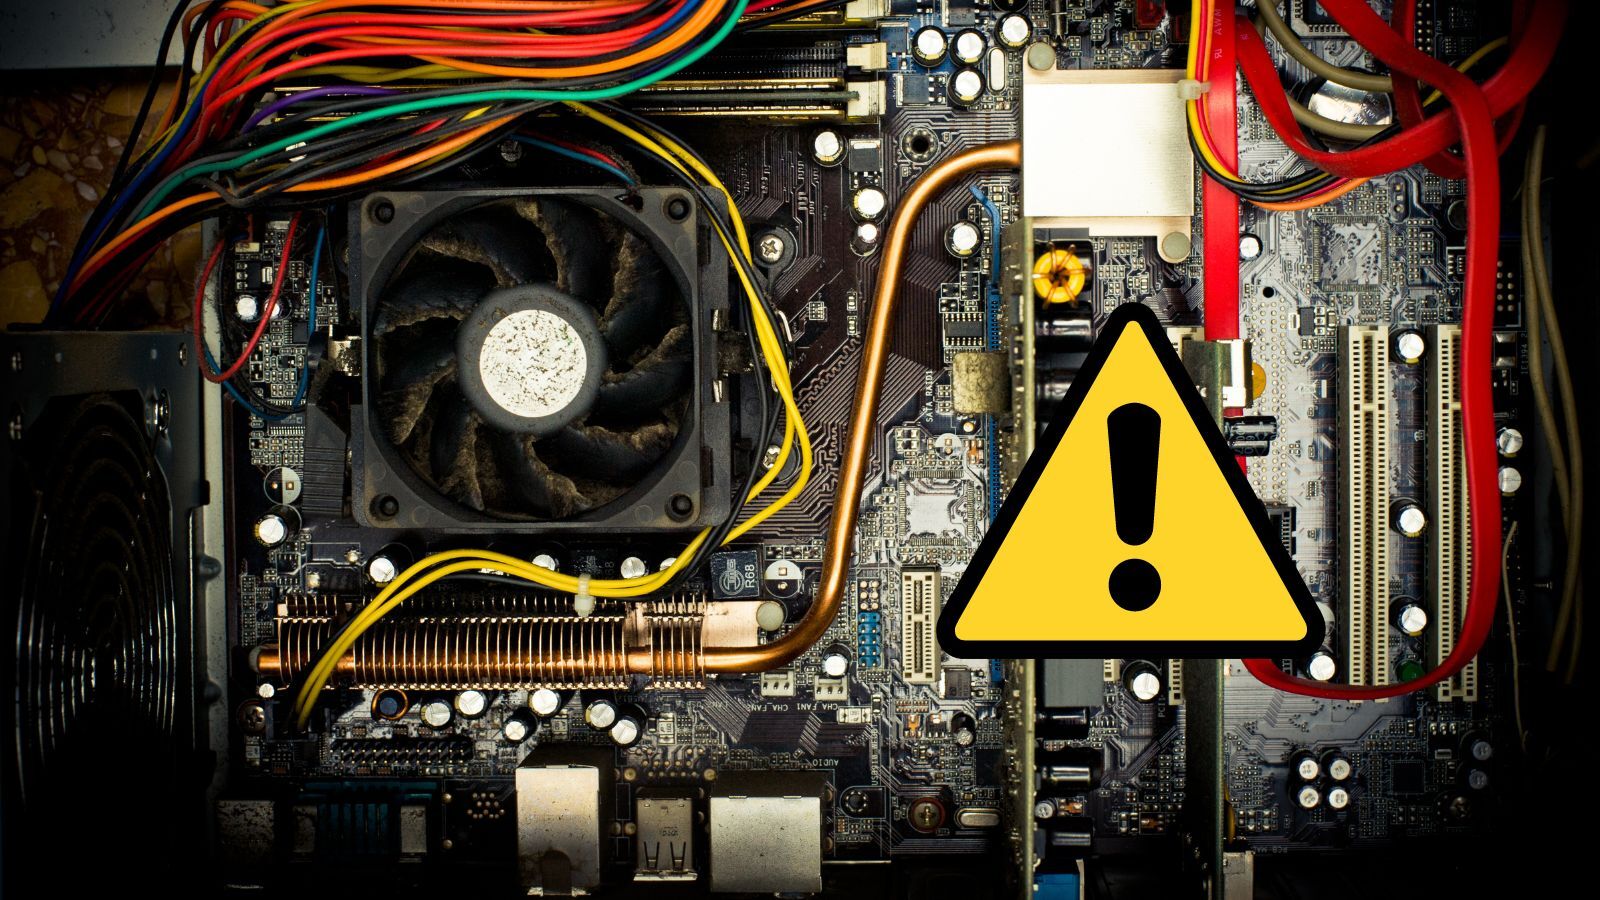 How to Tell if Motherboard is Bad or Dead